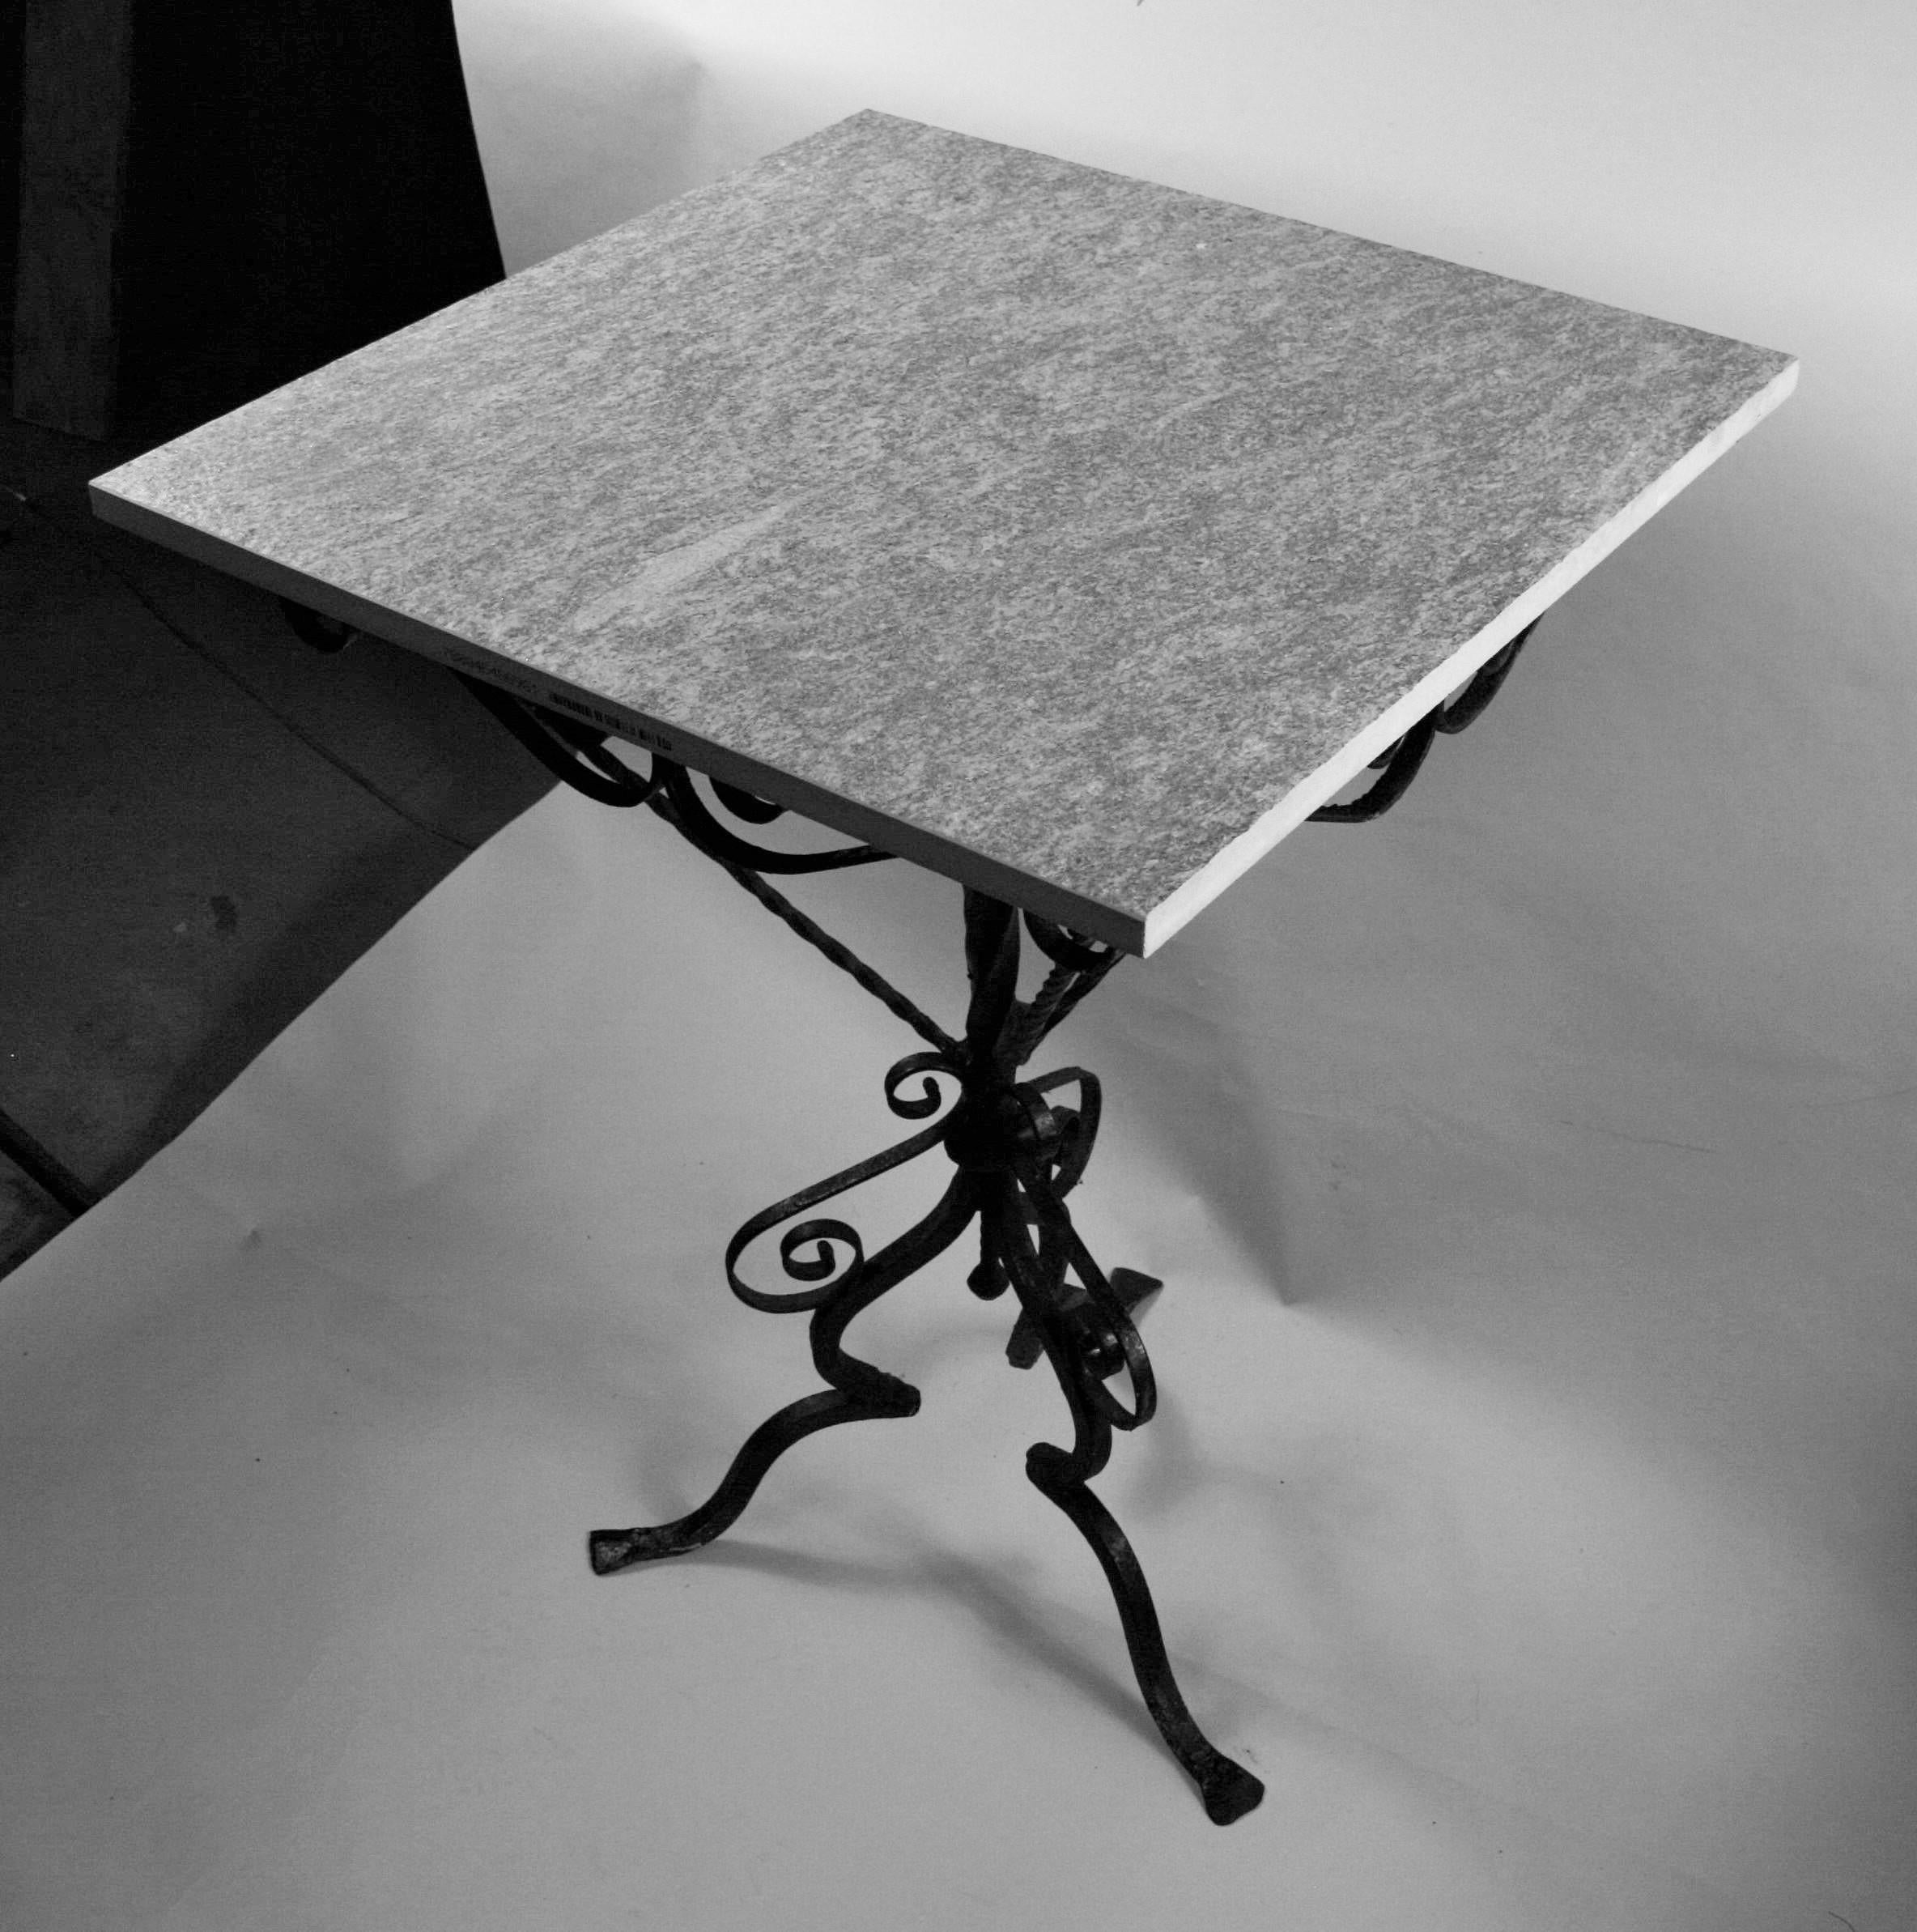 Italian Architectural Hand Made Iron Based Table with Ceramic Top For Sale 2